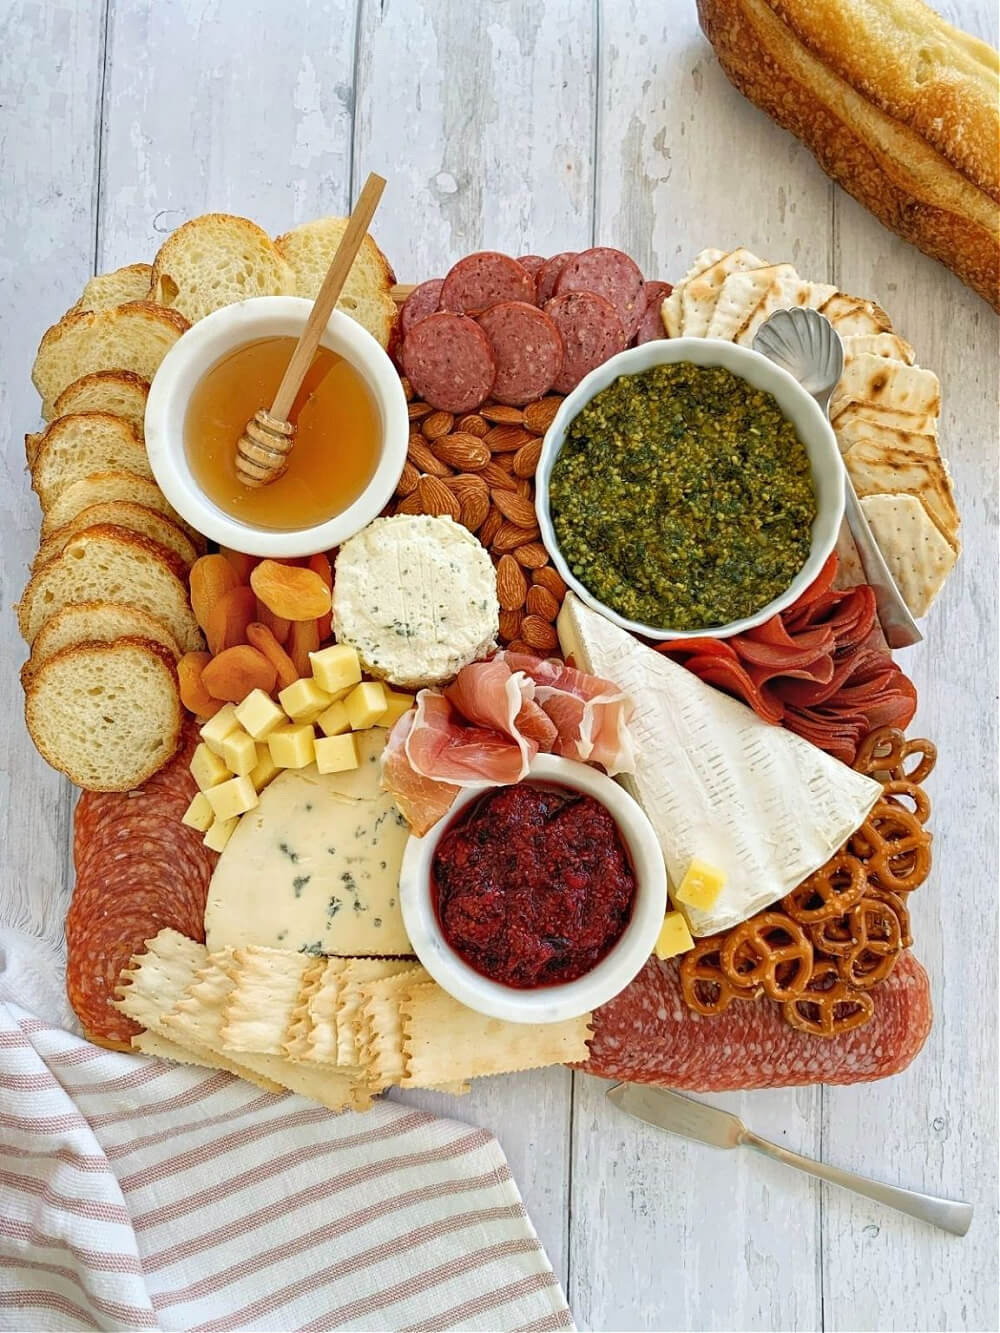 Small board ideas for feeding guests